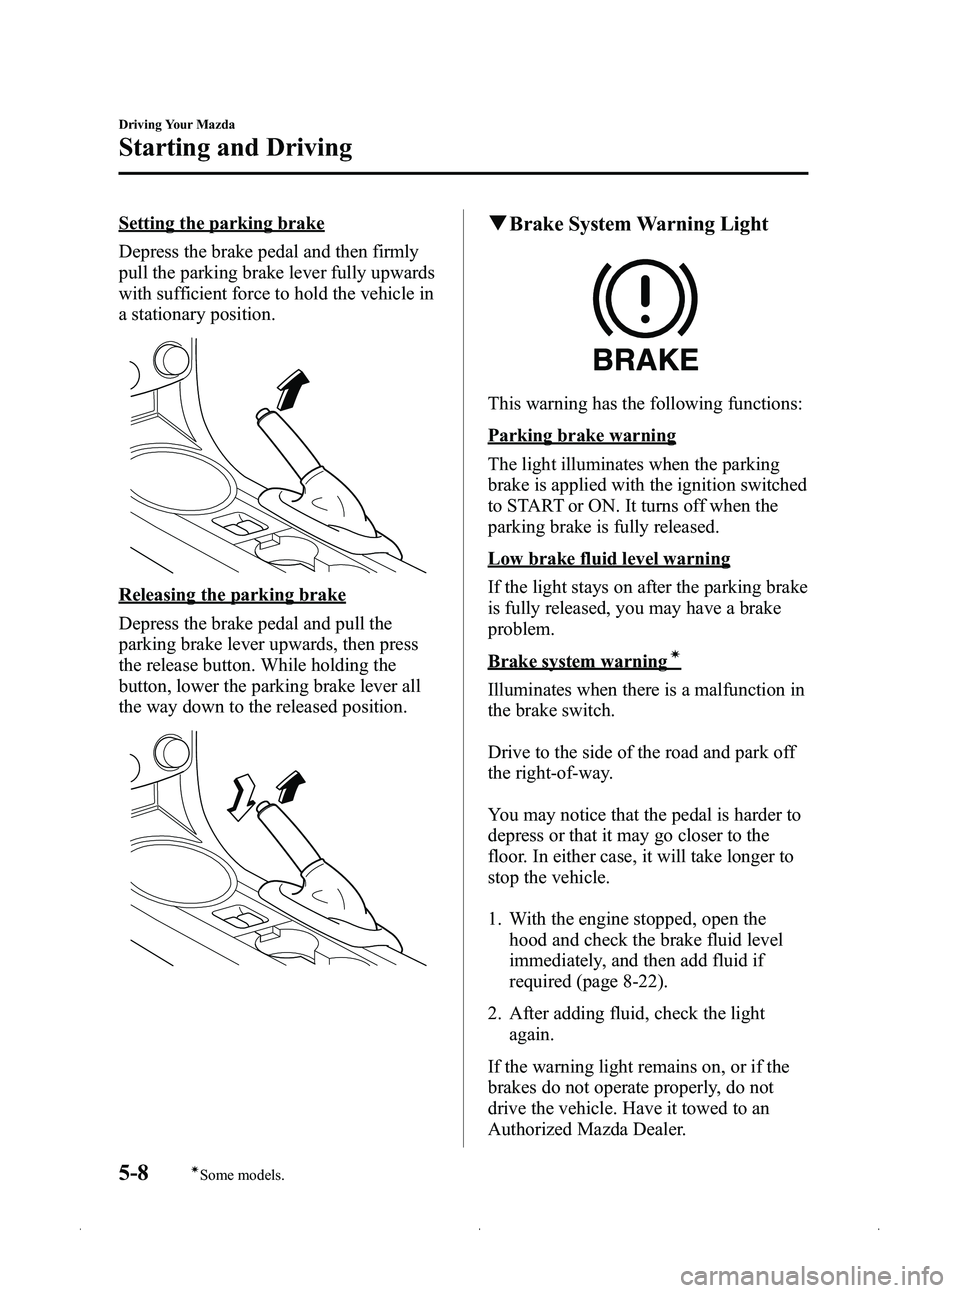 MAZDA MODEL MX-5 MIATA 2012  Owners Manual Black plate (164,1)
Setting the parking brake
Depress the brake pedal and then firmly
pull the parking brake lever fully upwards
with sufficient force to hold the vehicle in
a stationary position.
Rel